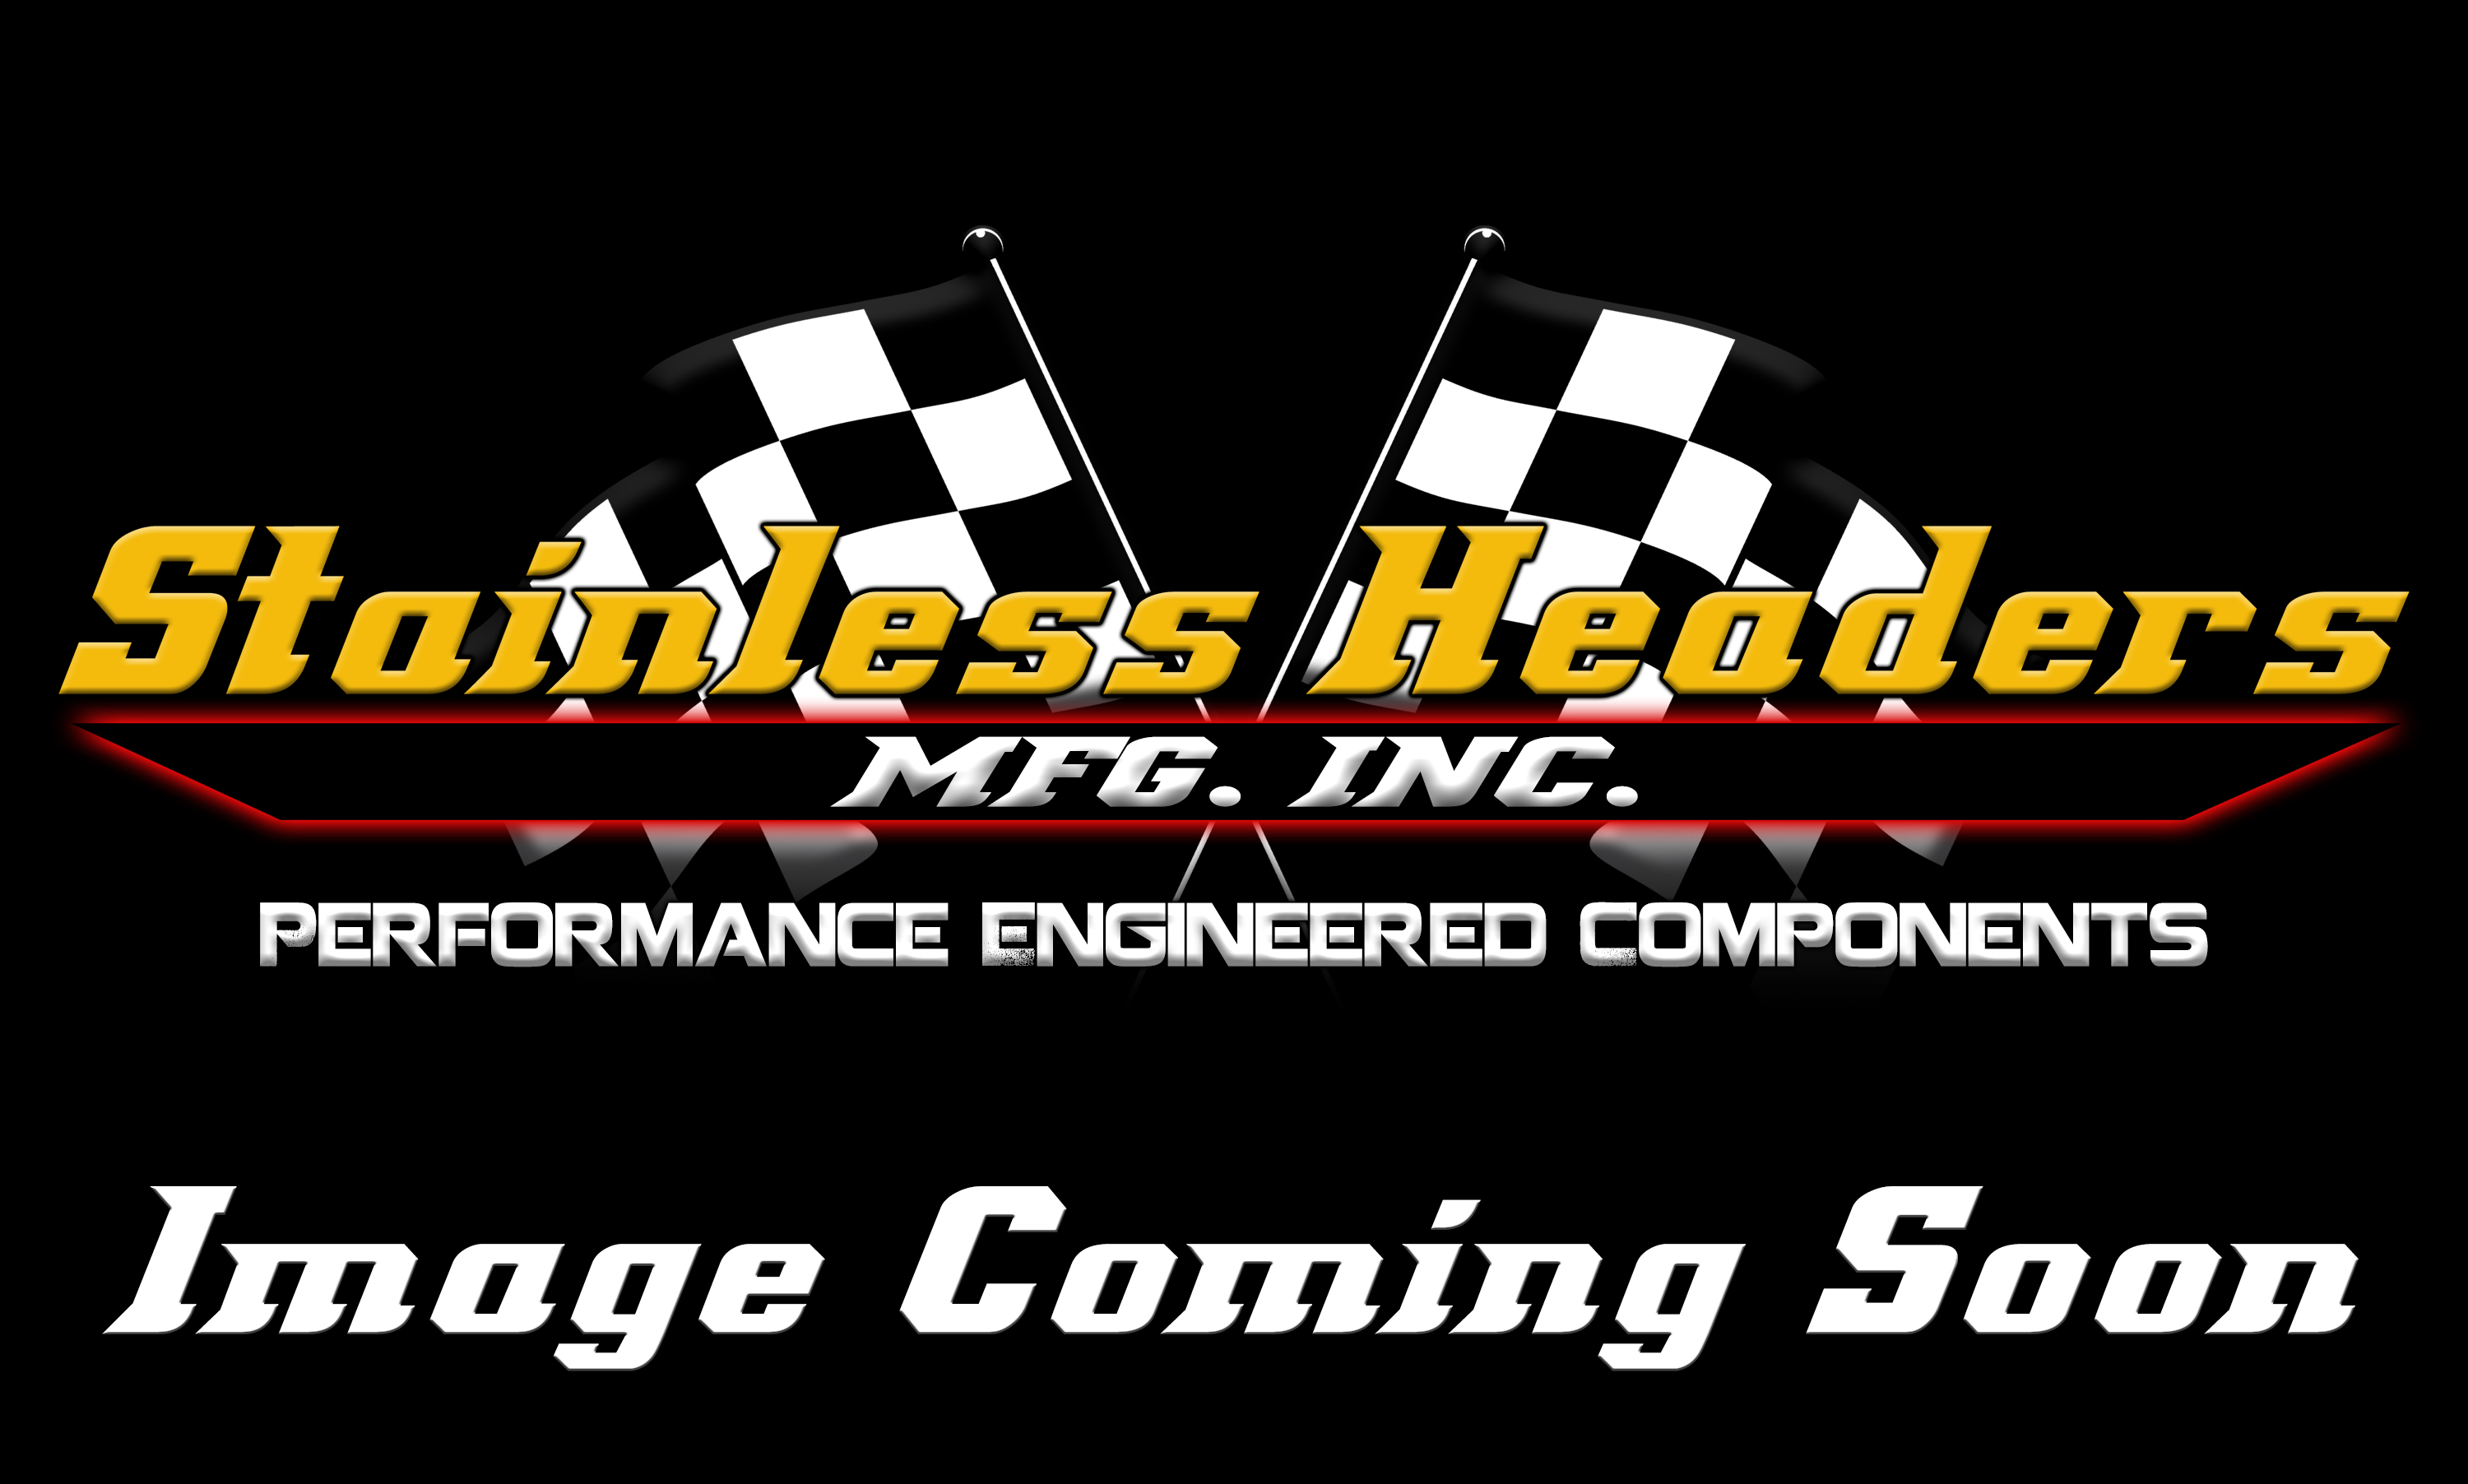 Stainless Headers - 2 1/2" Primary 5 into 1 Performance Merge Collector-16ga 304ss - Image 3